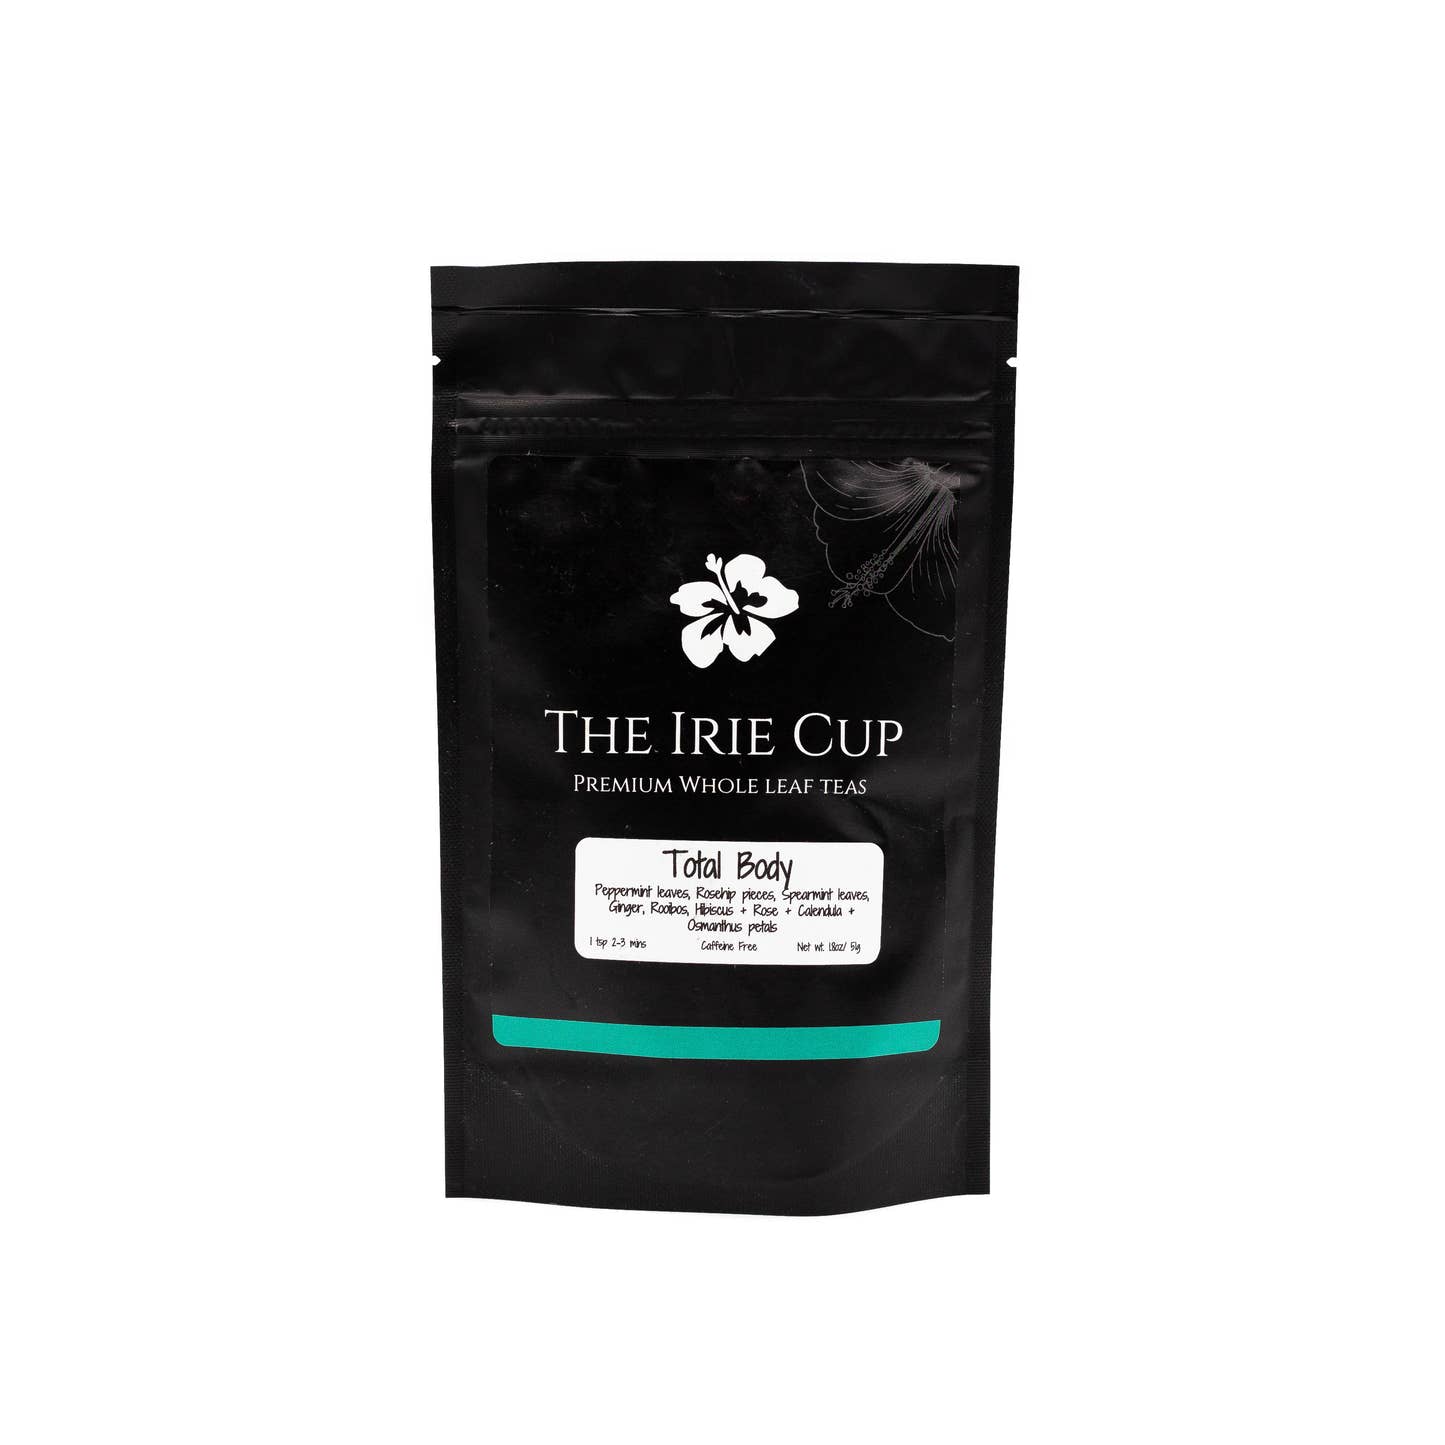 Shop Total Body by The Irie Cup at Sips by